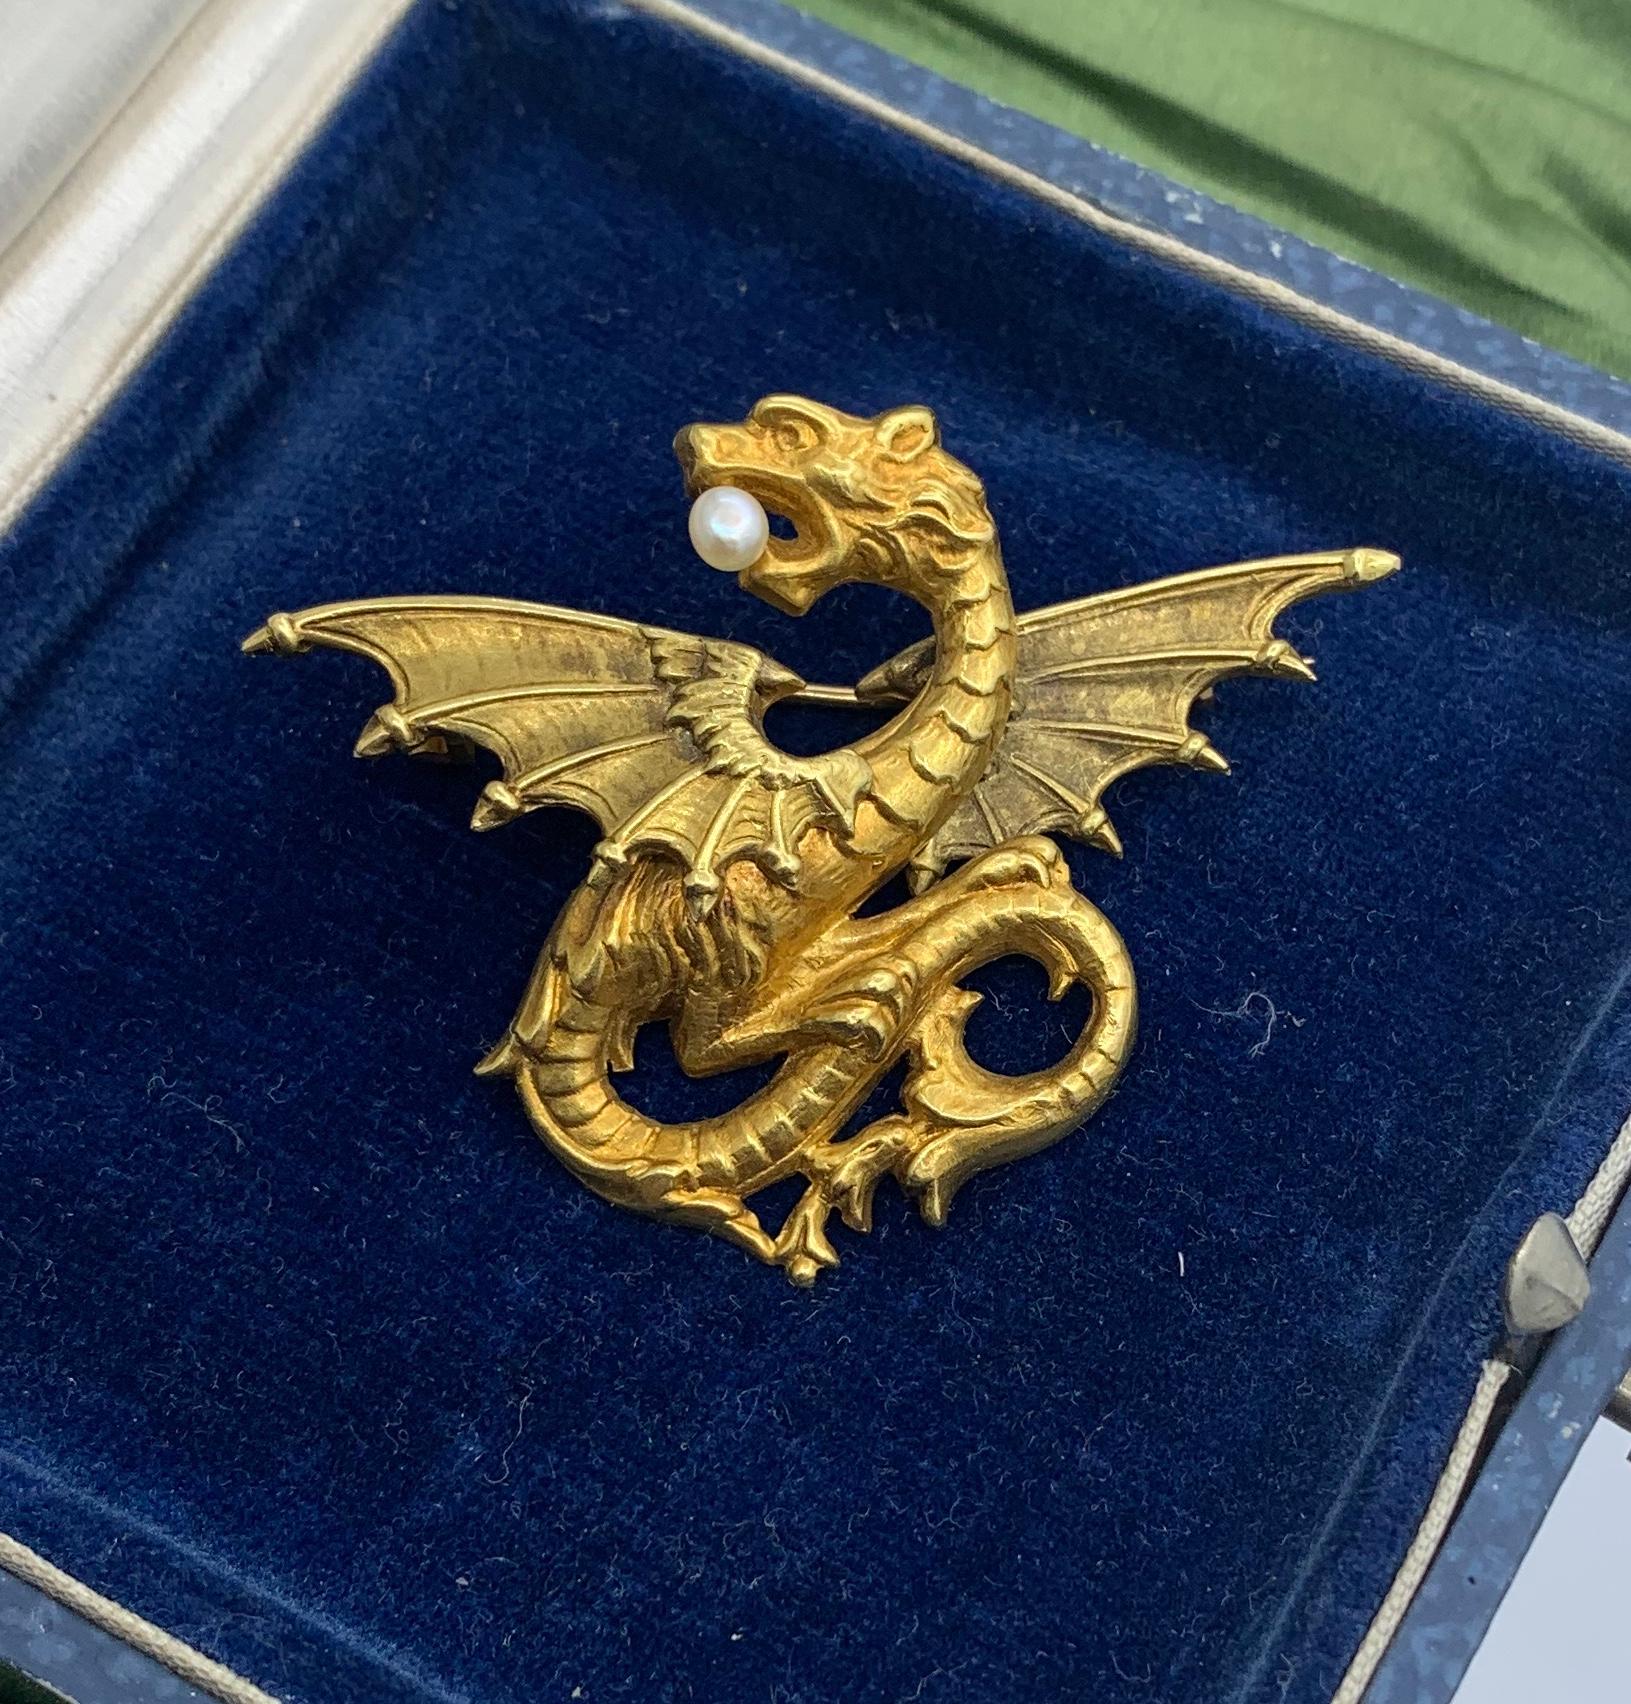 THIS IS A STUNNING MUSEUM QUALITY FRENCH BEAUX ARTS RENAISSANCE REVIVAL 18 KARAT GOLD PENDANT OR BROOCH OF A GRIFFIN OR DRAGON HOLDING A STUNNING PEARL IN THE MOUTH.
This is a beautiful Beaux Arts - Art Nouveau - Belle Epoque pendant/brooch in the